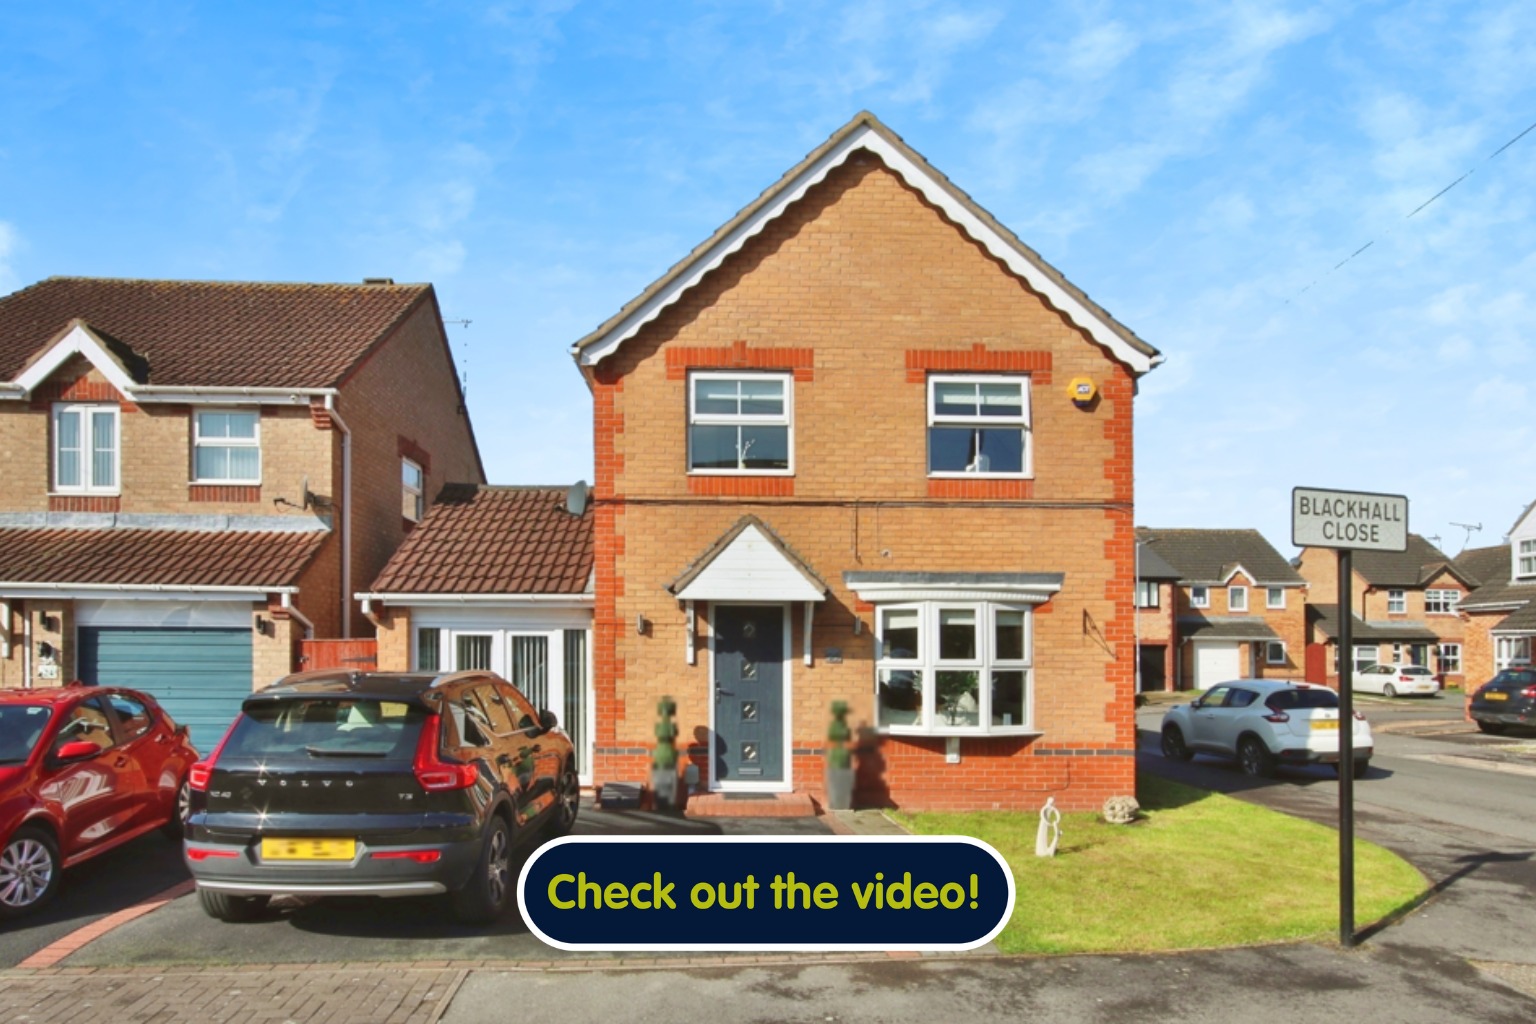 4 bed detached house for sale in Blackhall Close, Hull - Property Image 1